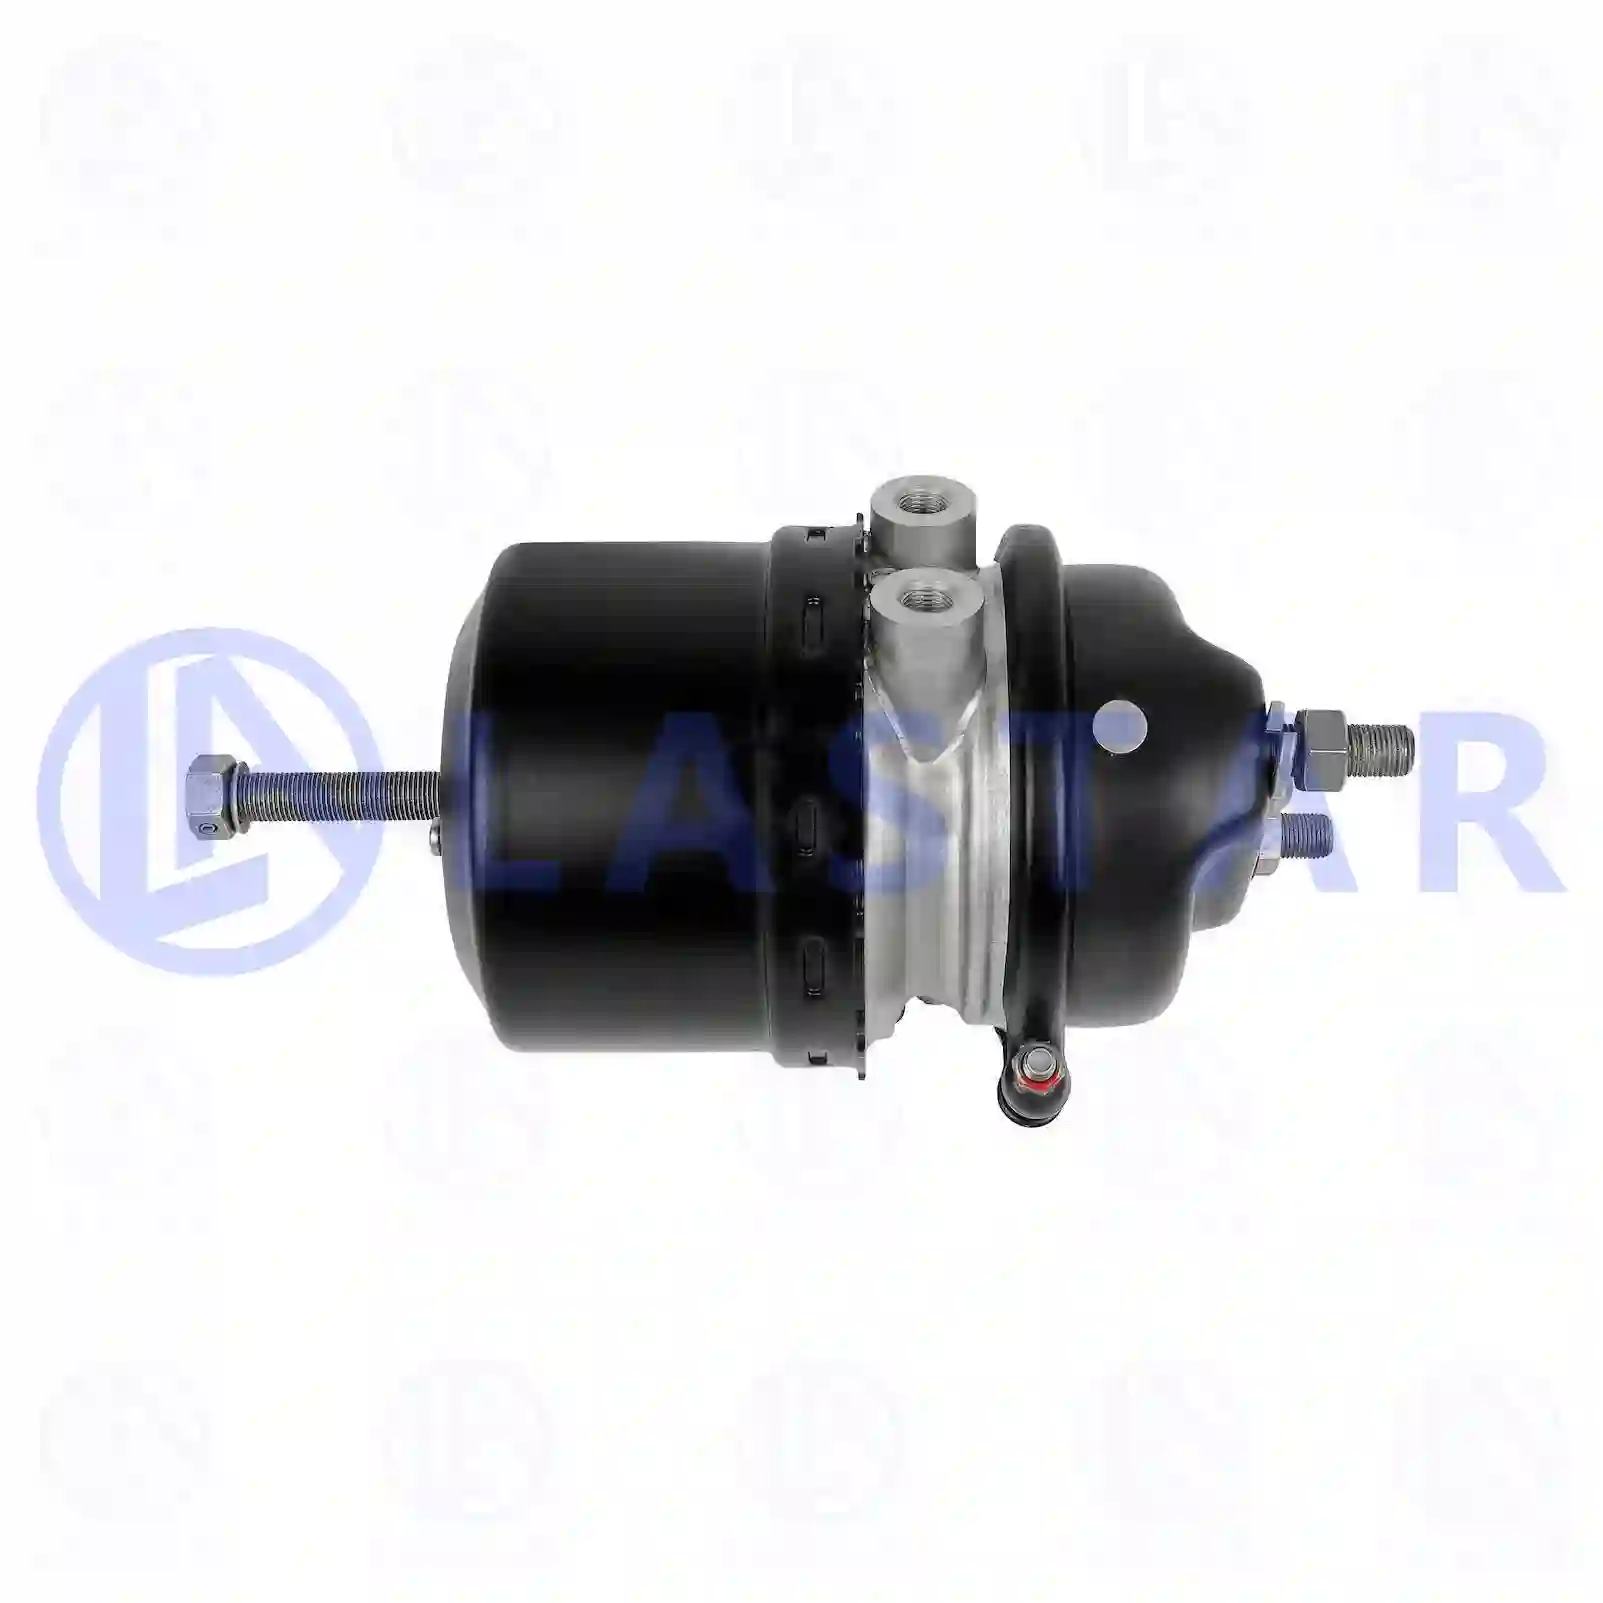 Spring brake cylinder, right, 77713749, 0203278700, 1506402, A3A827202, M076162, JAE0210408918, 336681, 5812868, 0174208918 ||  77713749 Lastar Spare Part | Truck Spare Parts, Auotomotive Spare Parts Spring brake cylinder, right, 77713749, 0203278700, 1506402, A3A827202, M076162, JAE0210408918, 336681, 5812868, 0174208918 ||  77713749 Lastar Spare Part | Truck Spare Parts, Auotomotive Spare Parts